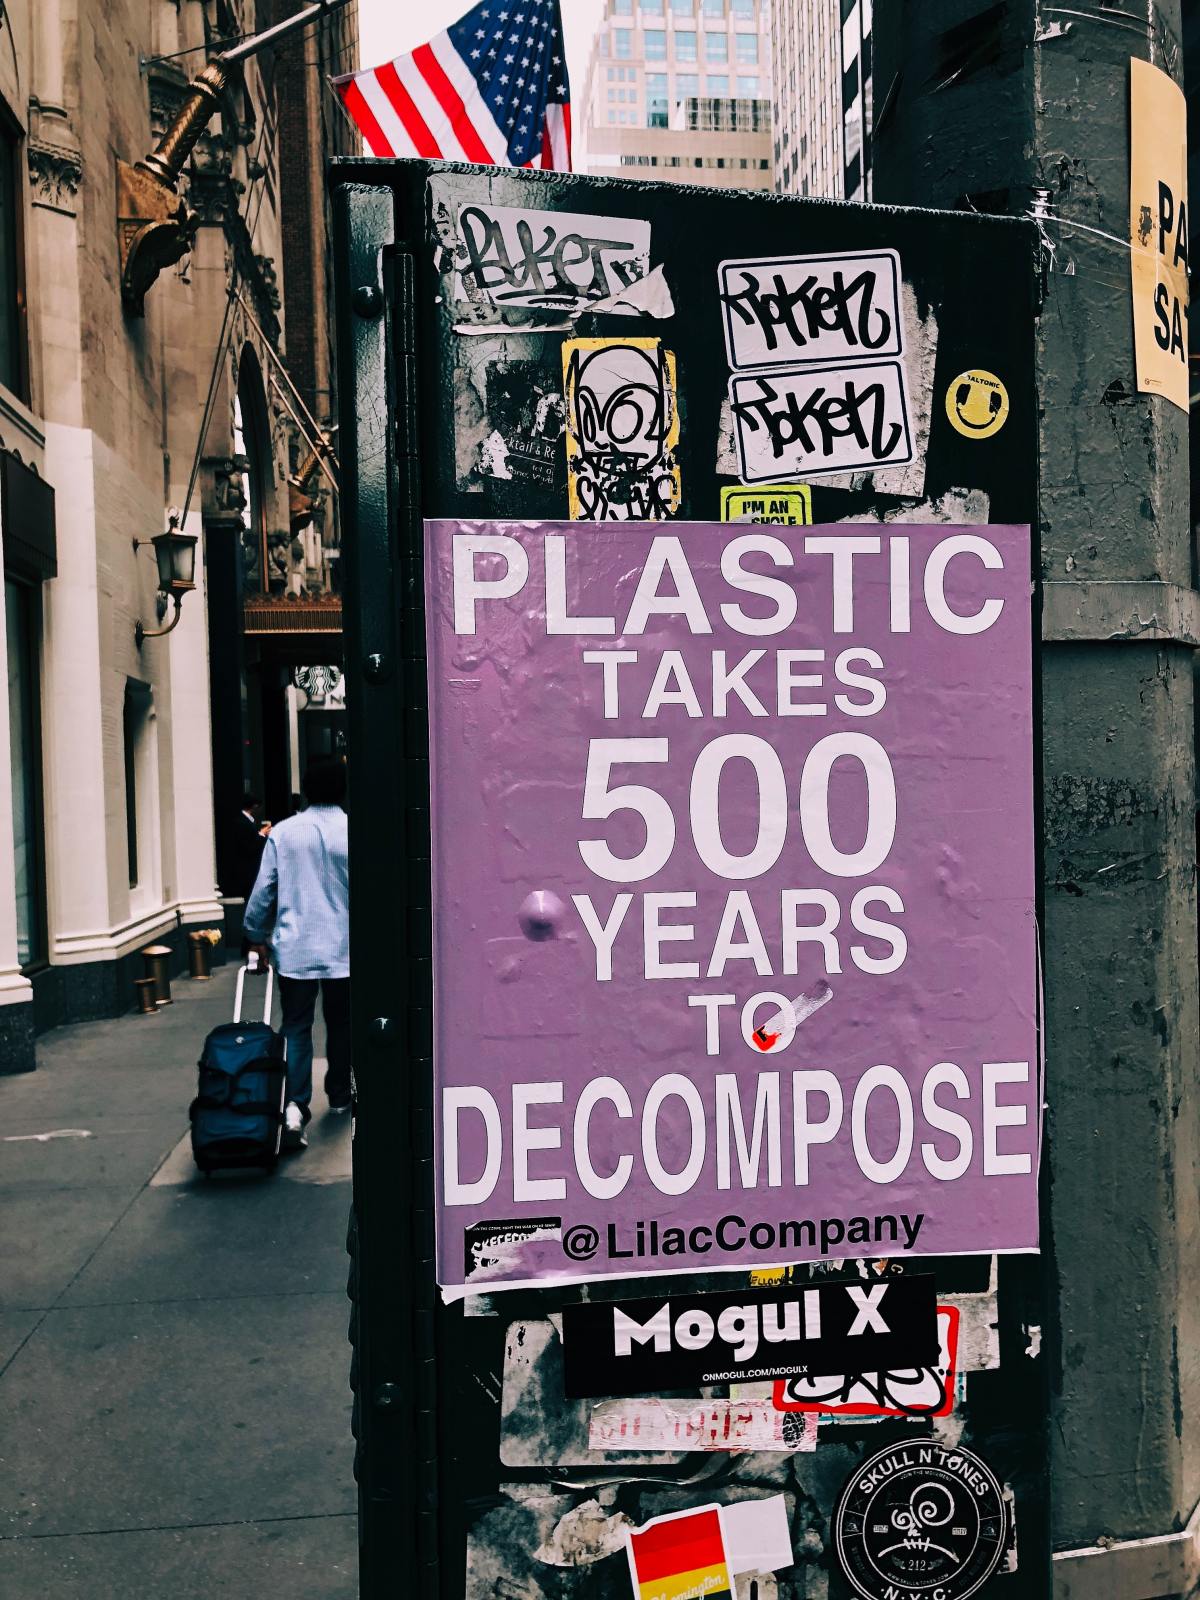 Plastic takes 500 years to decompose.